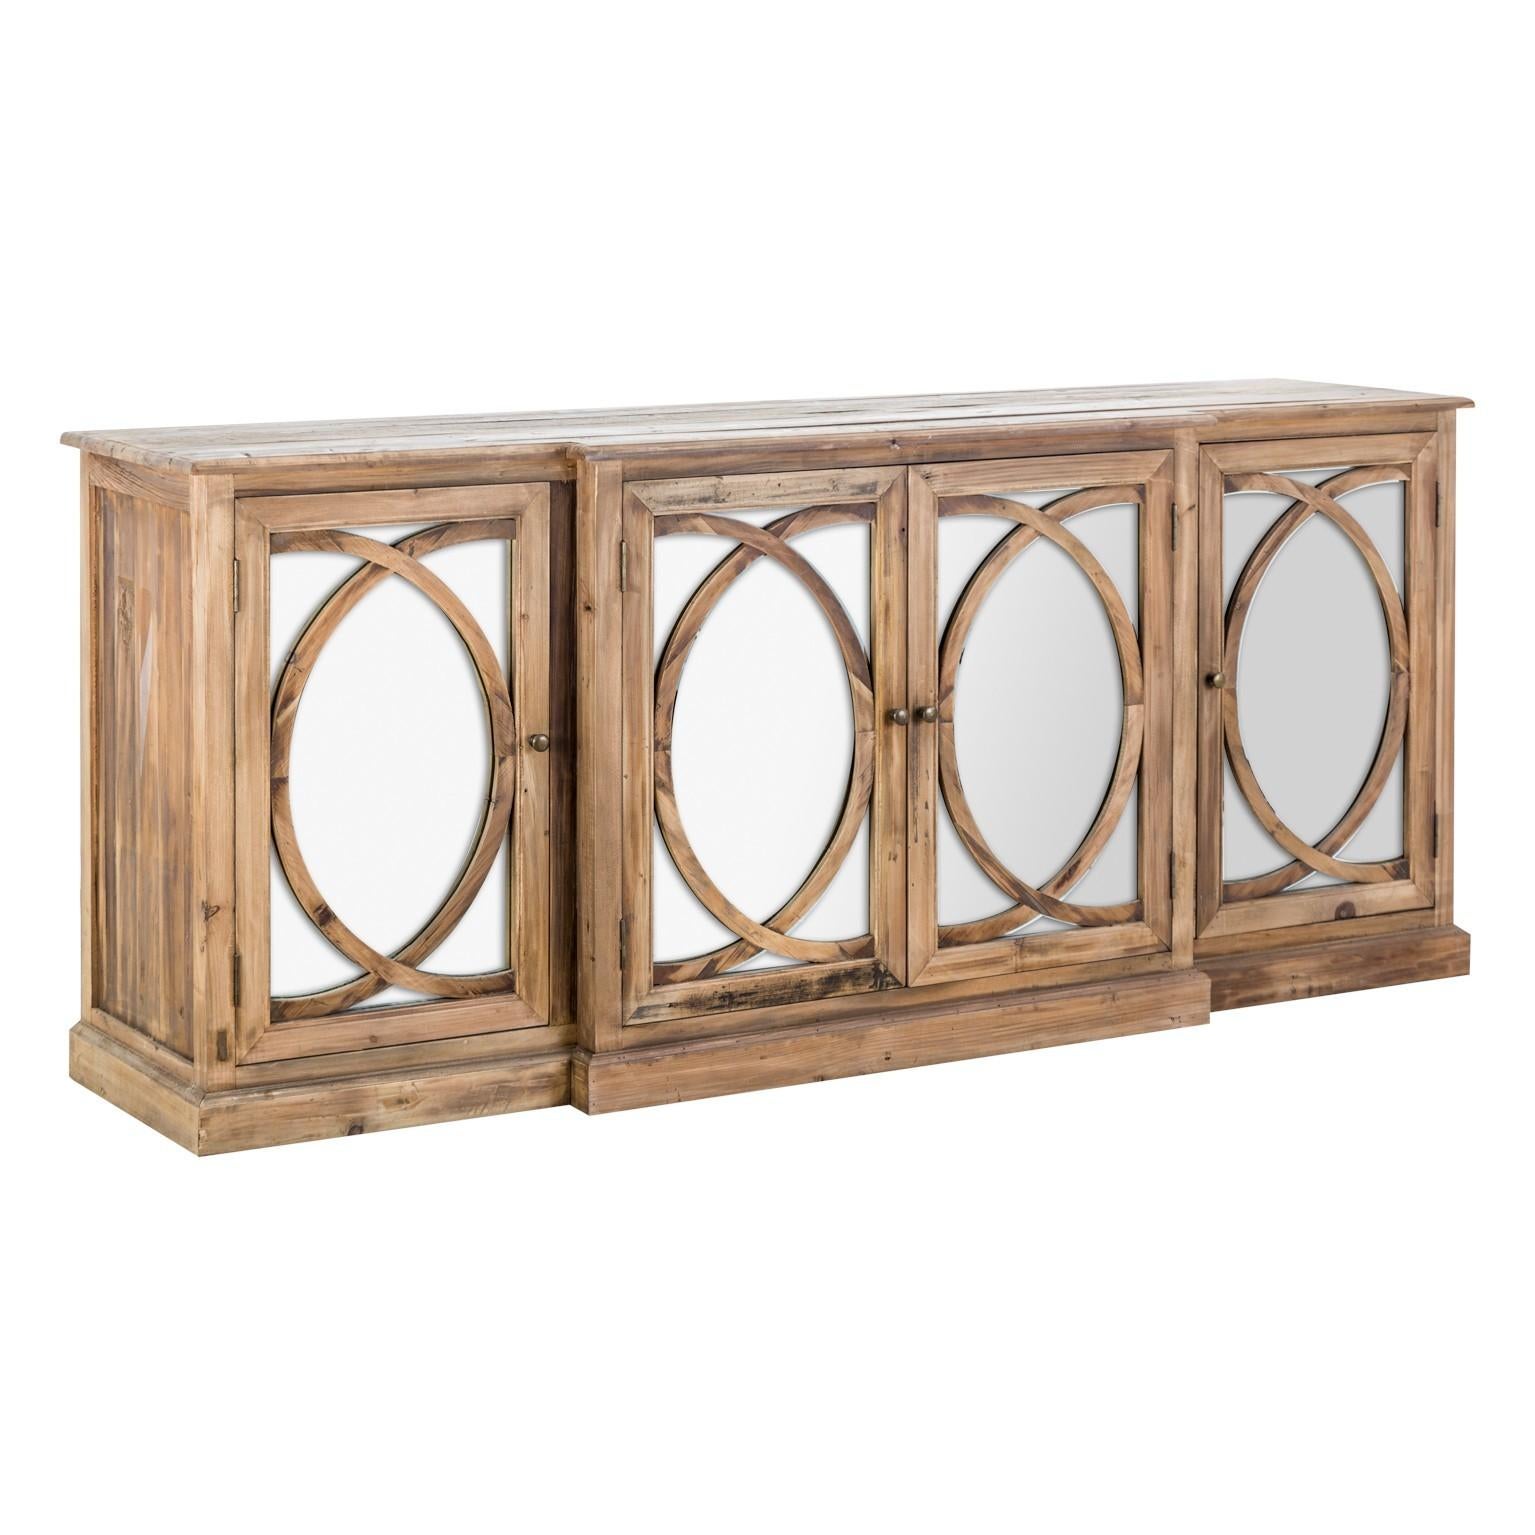 Sophisticated sideboard with pure lines, four graphic doors in pinewood adorned with mirror. Regency style and sober design, new item, never used.